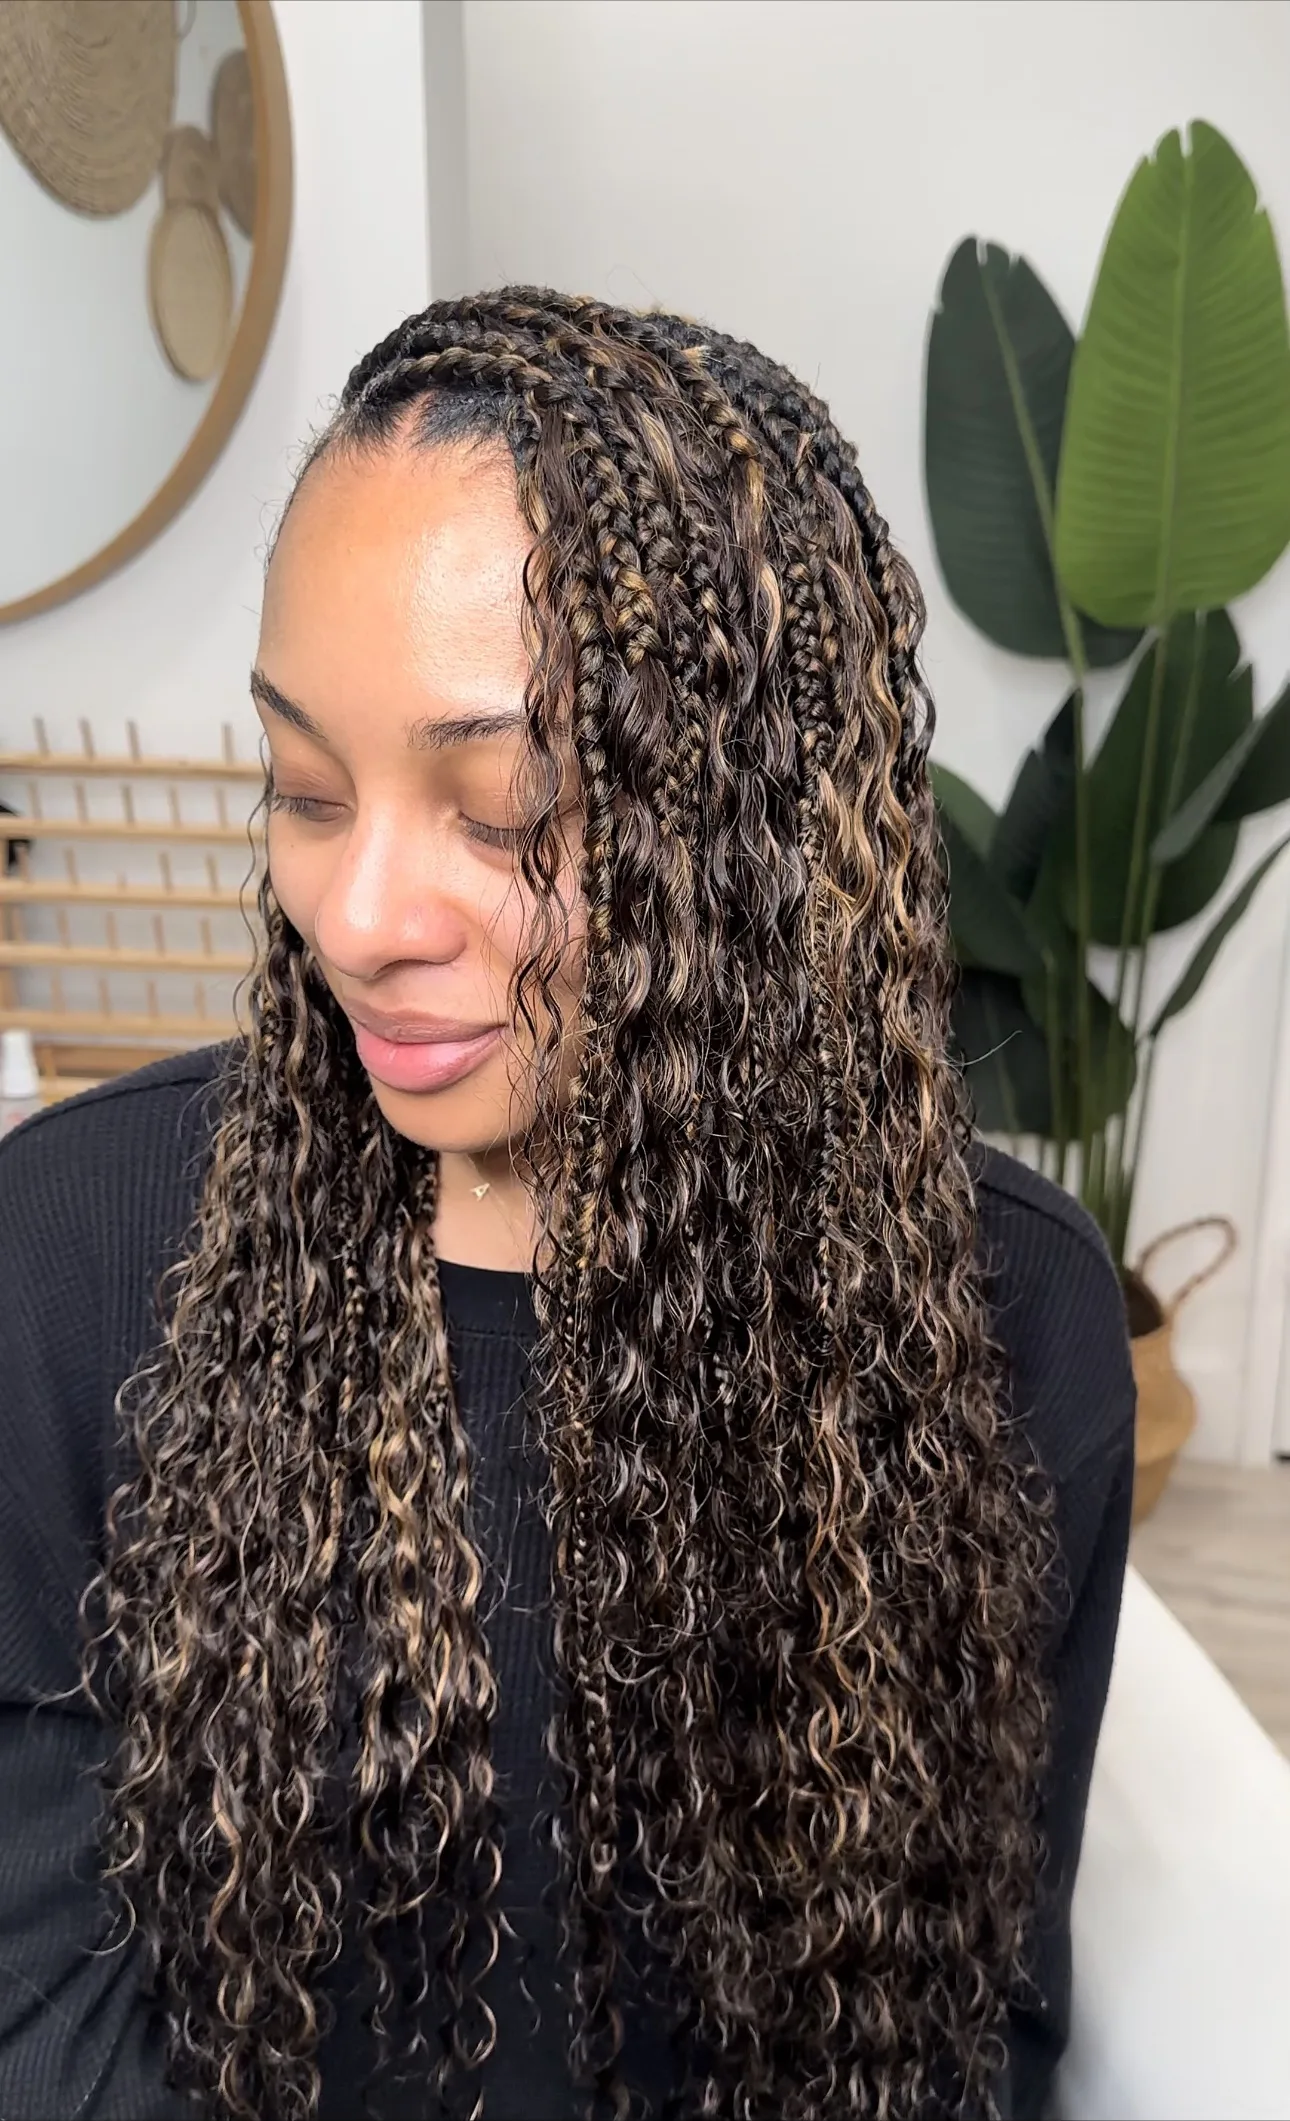 What's the Best Human Hair to use for braiding?